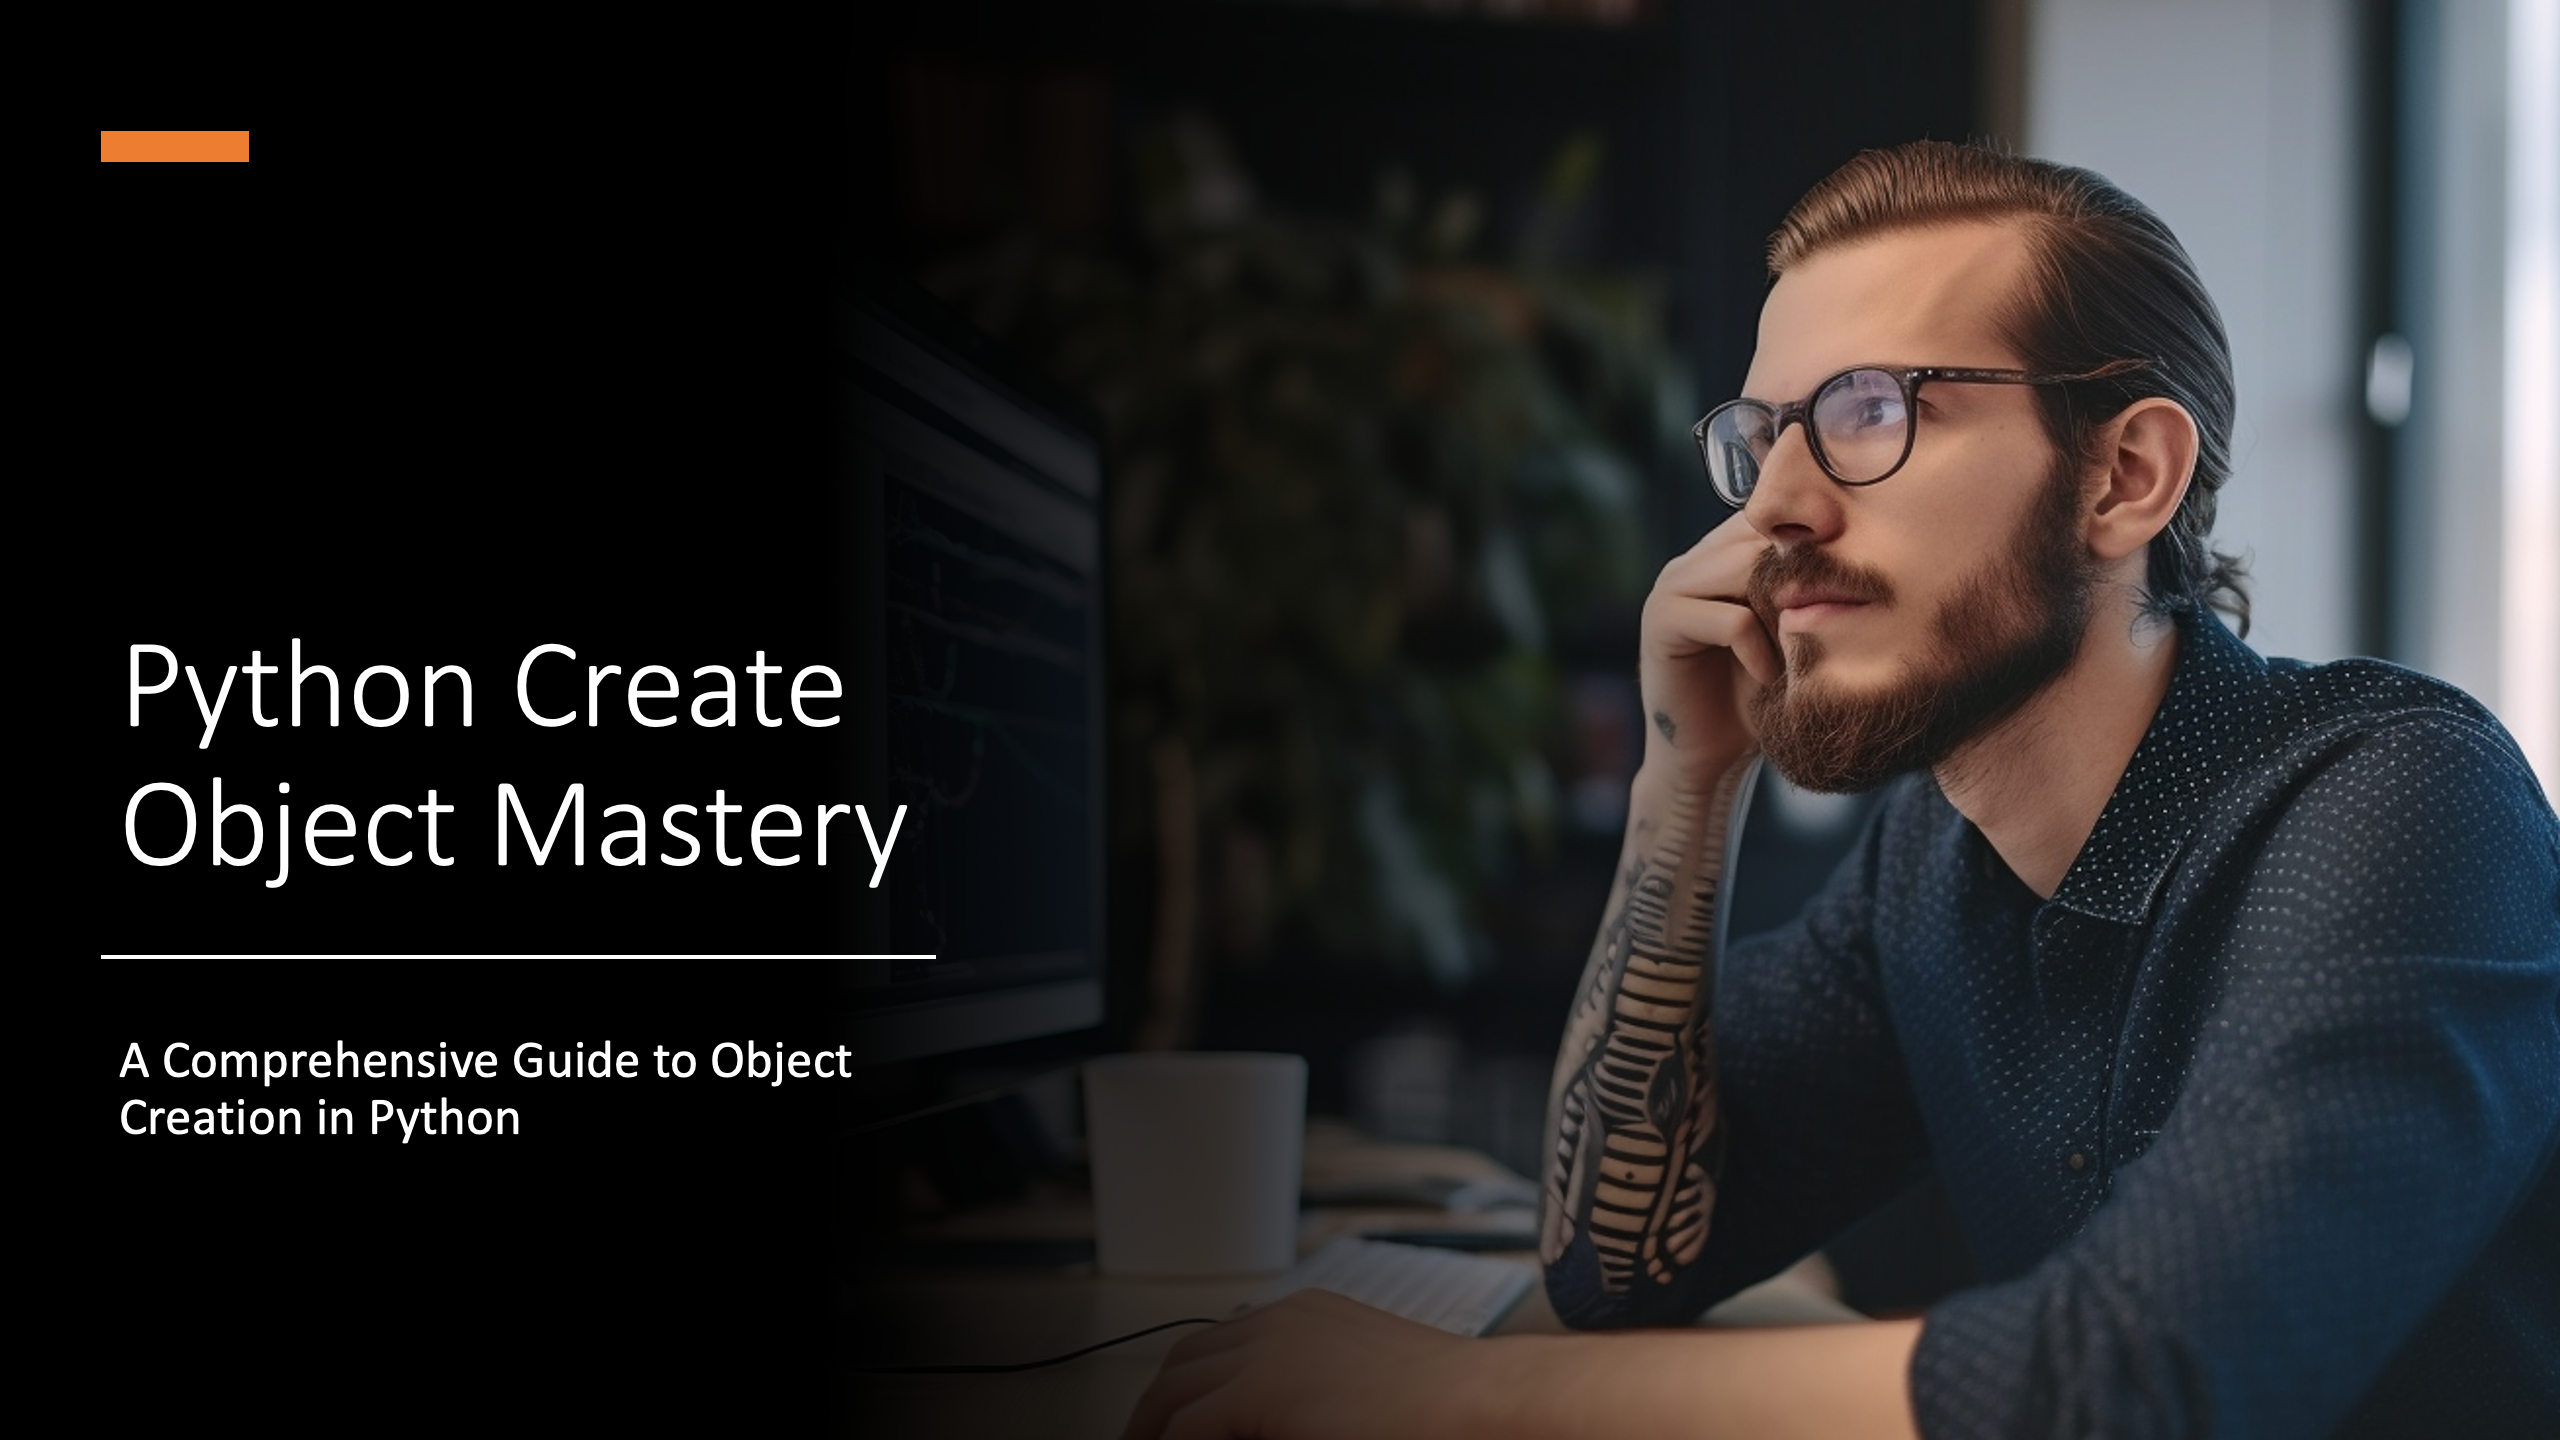 Python Create Object Mastery - A Comprehensive Guide to Object Creation in Python